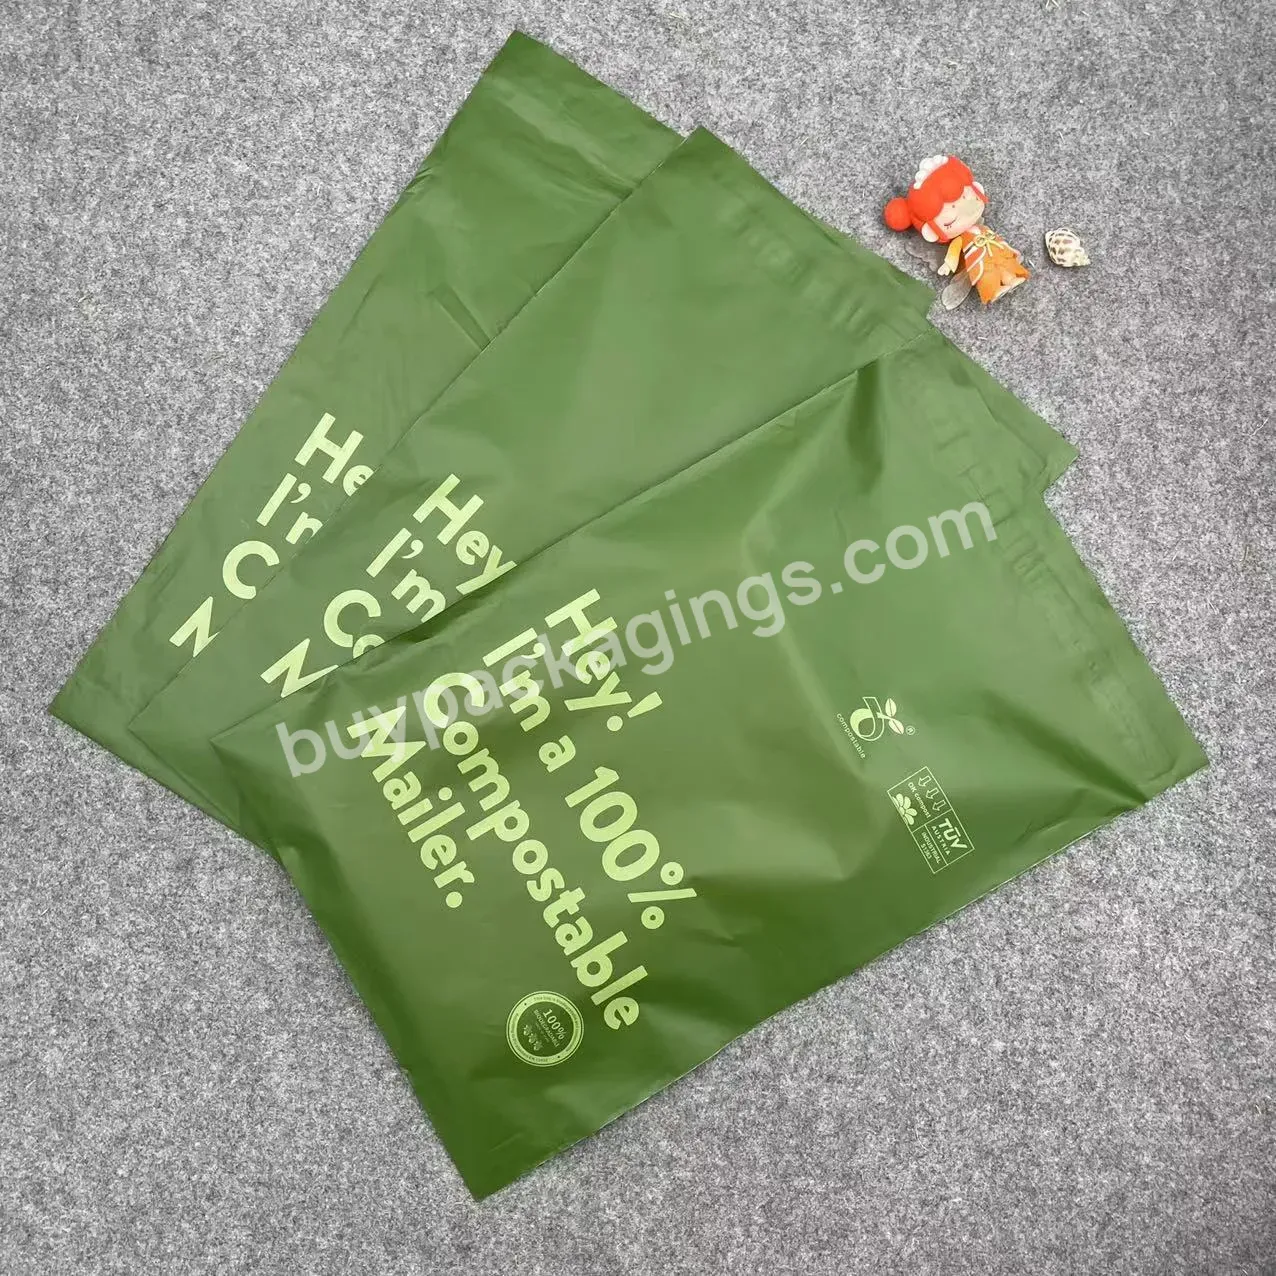 New Arrival Custom Logo Printed 100% Biodegradable Compostable Green Packaging Poly Mailer Shipping Mailing Bags For Clothing - Buy Custom Logo Printed Biodegradable Mailing Bags,100% Biodegradable Compostable Shipping Bags,Shipping Bags For Clothing.